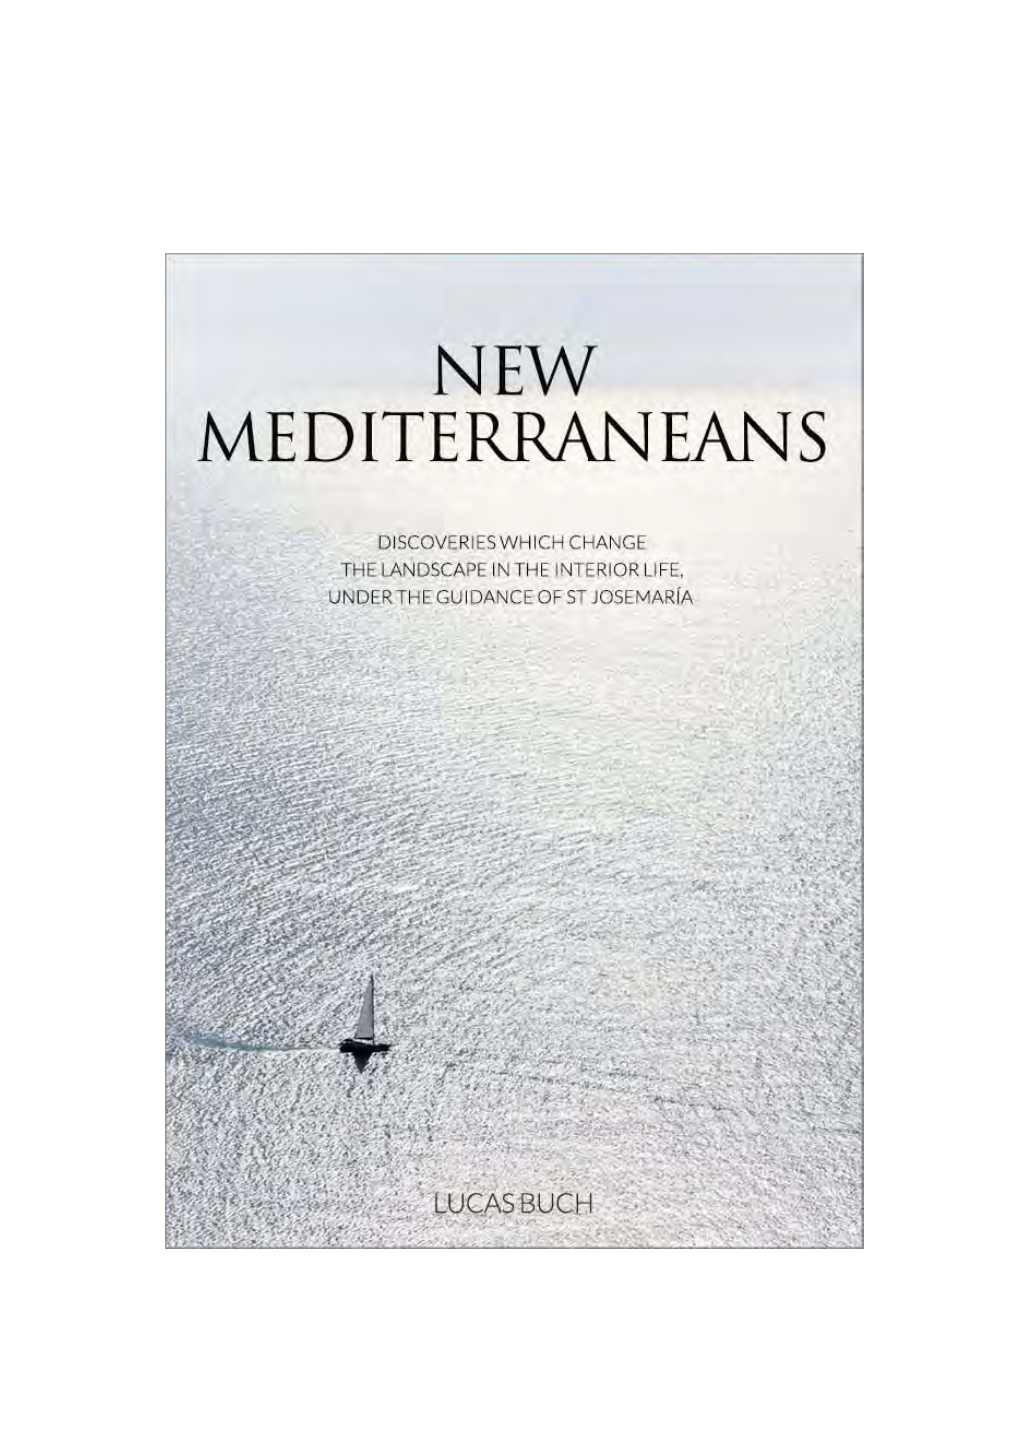 New Mediterraneans Discoveries Which Change the Landscape in the Interior Life, Under the Guidance of St Josemaría